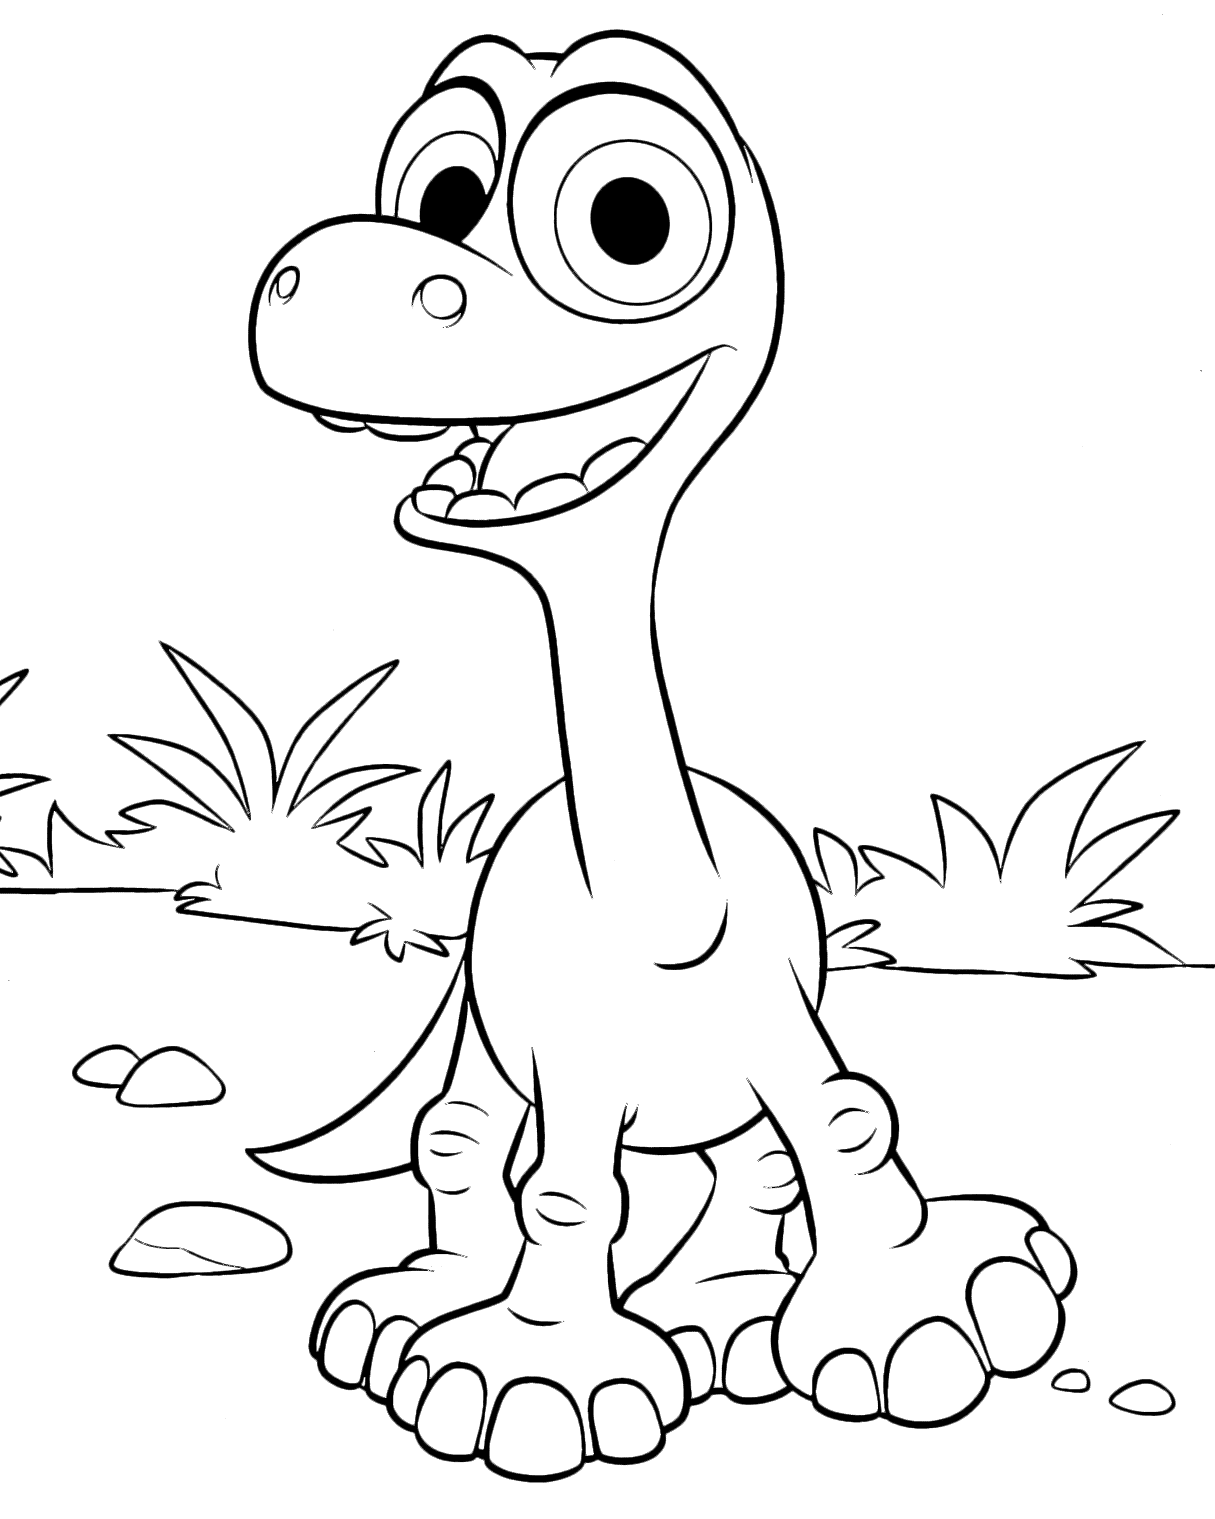 The Good Dinosaur – Arlo Coloring Pages